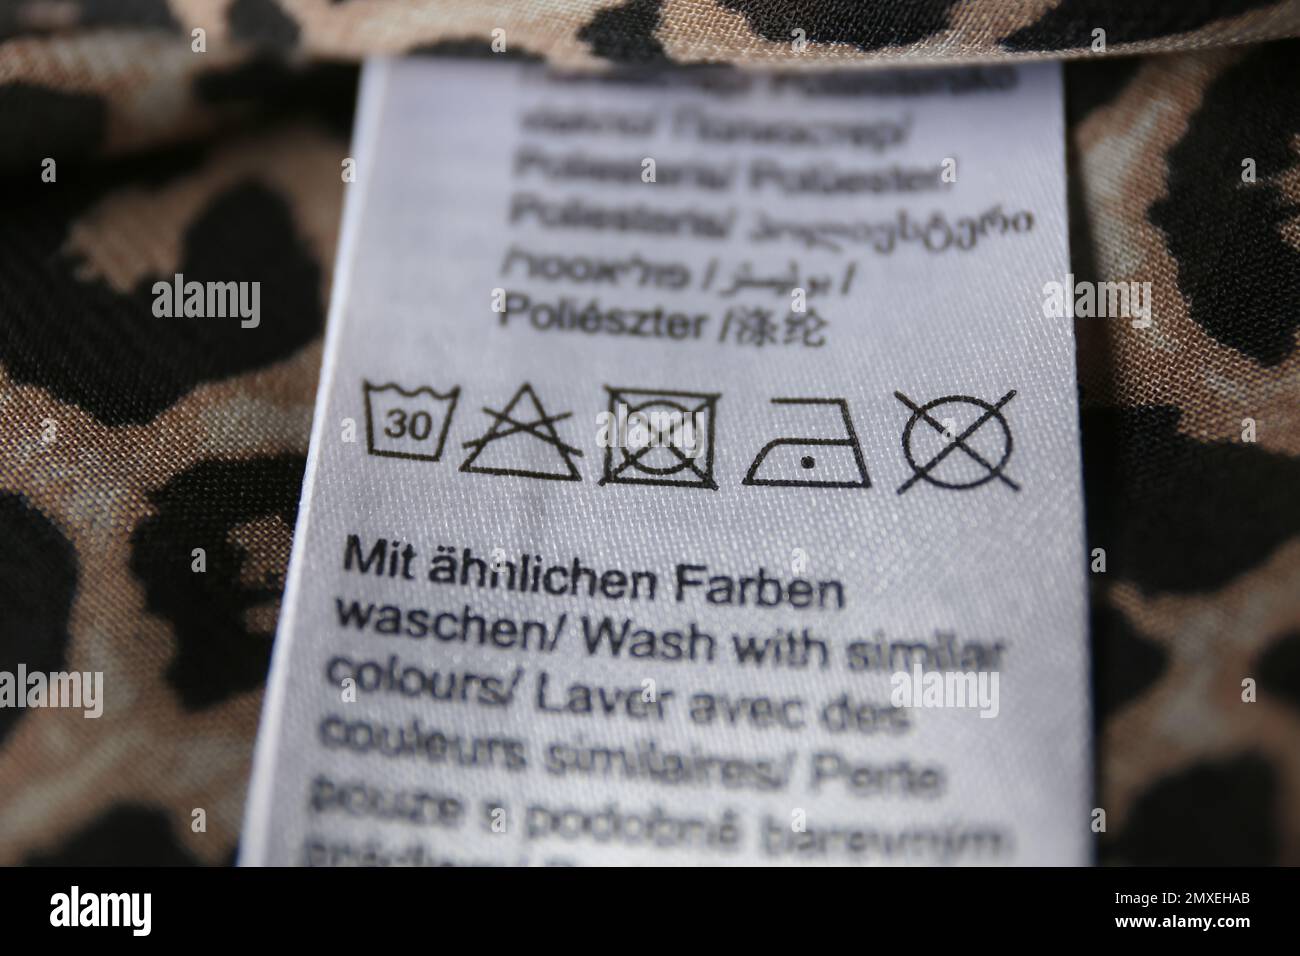 Clothing label with care symbols on shirt, closeup view Stock Photo